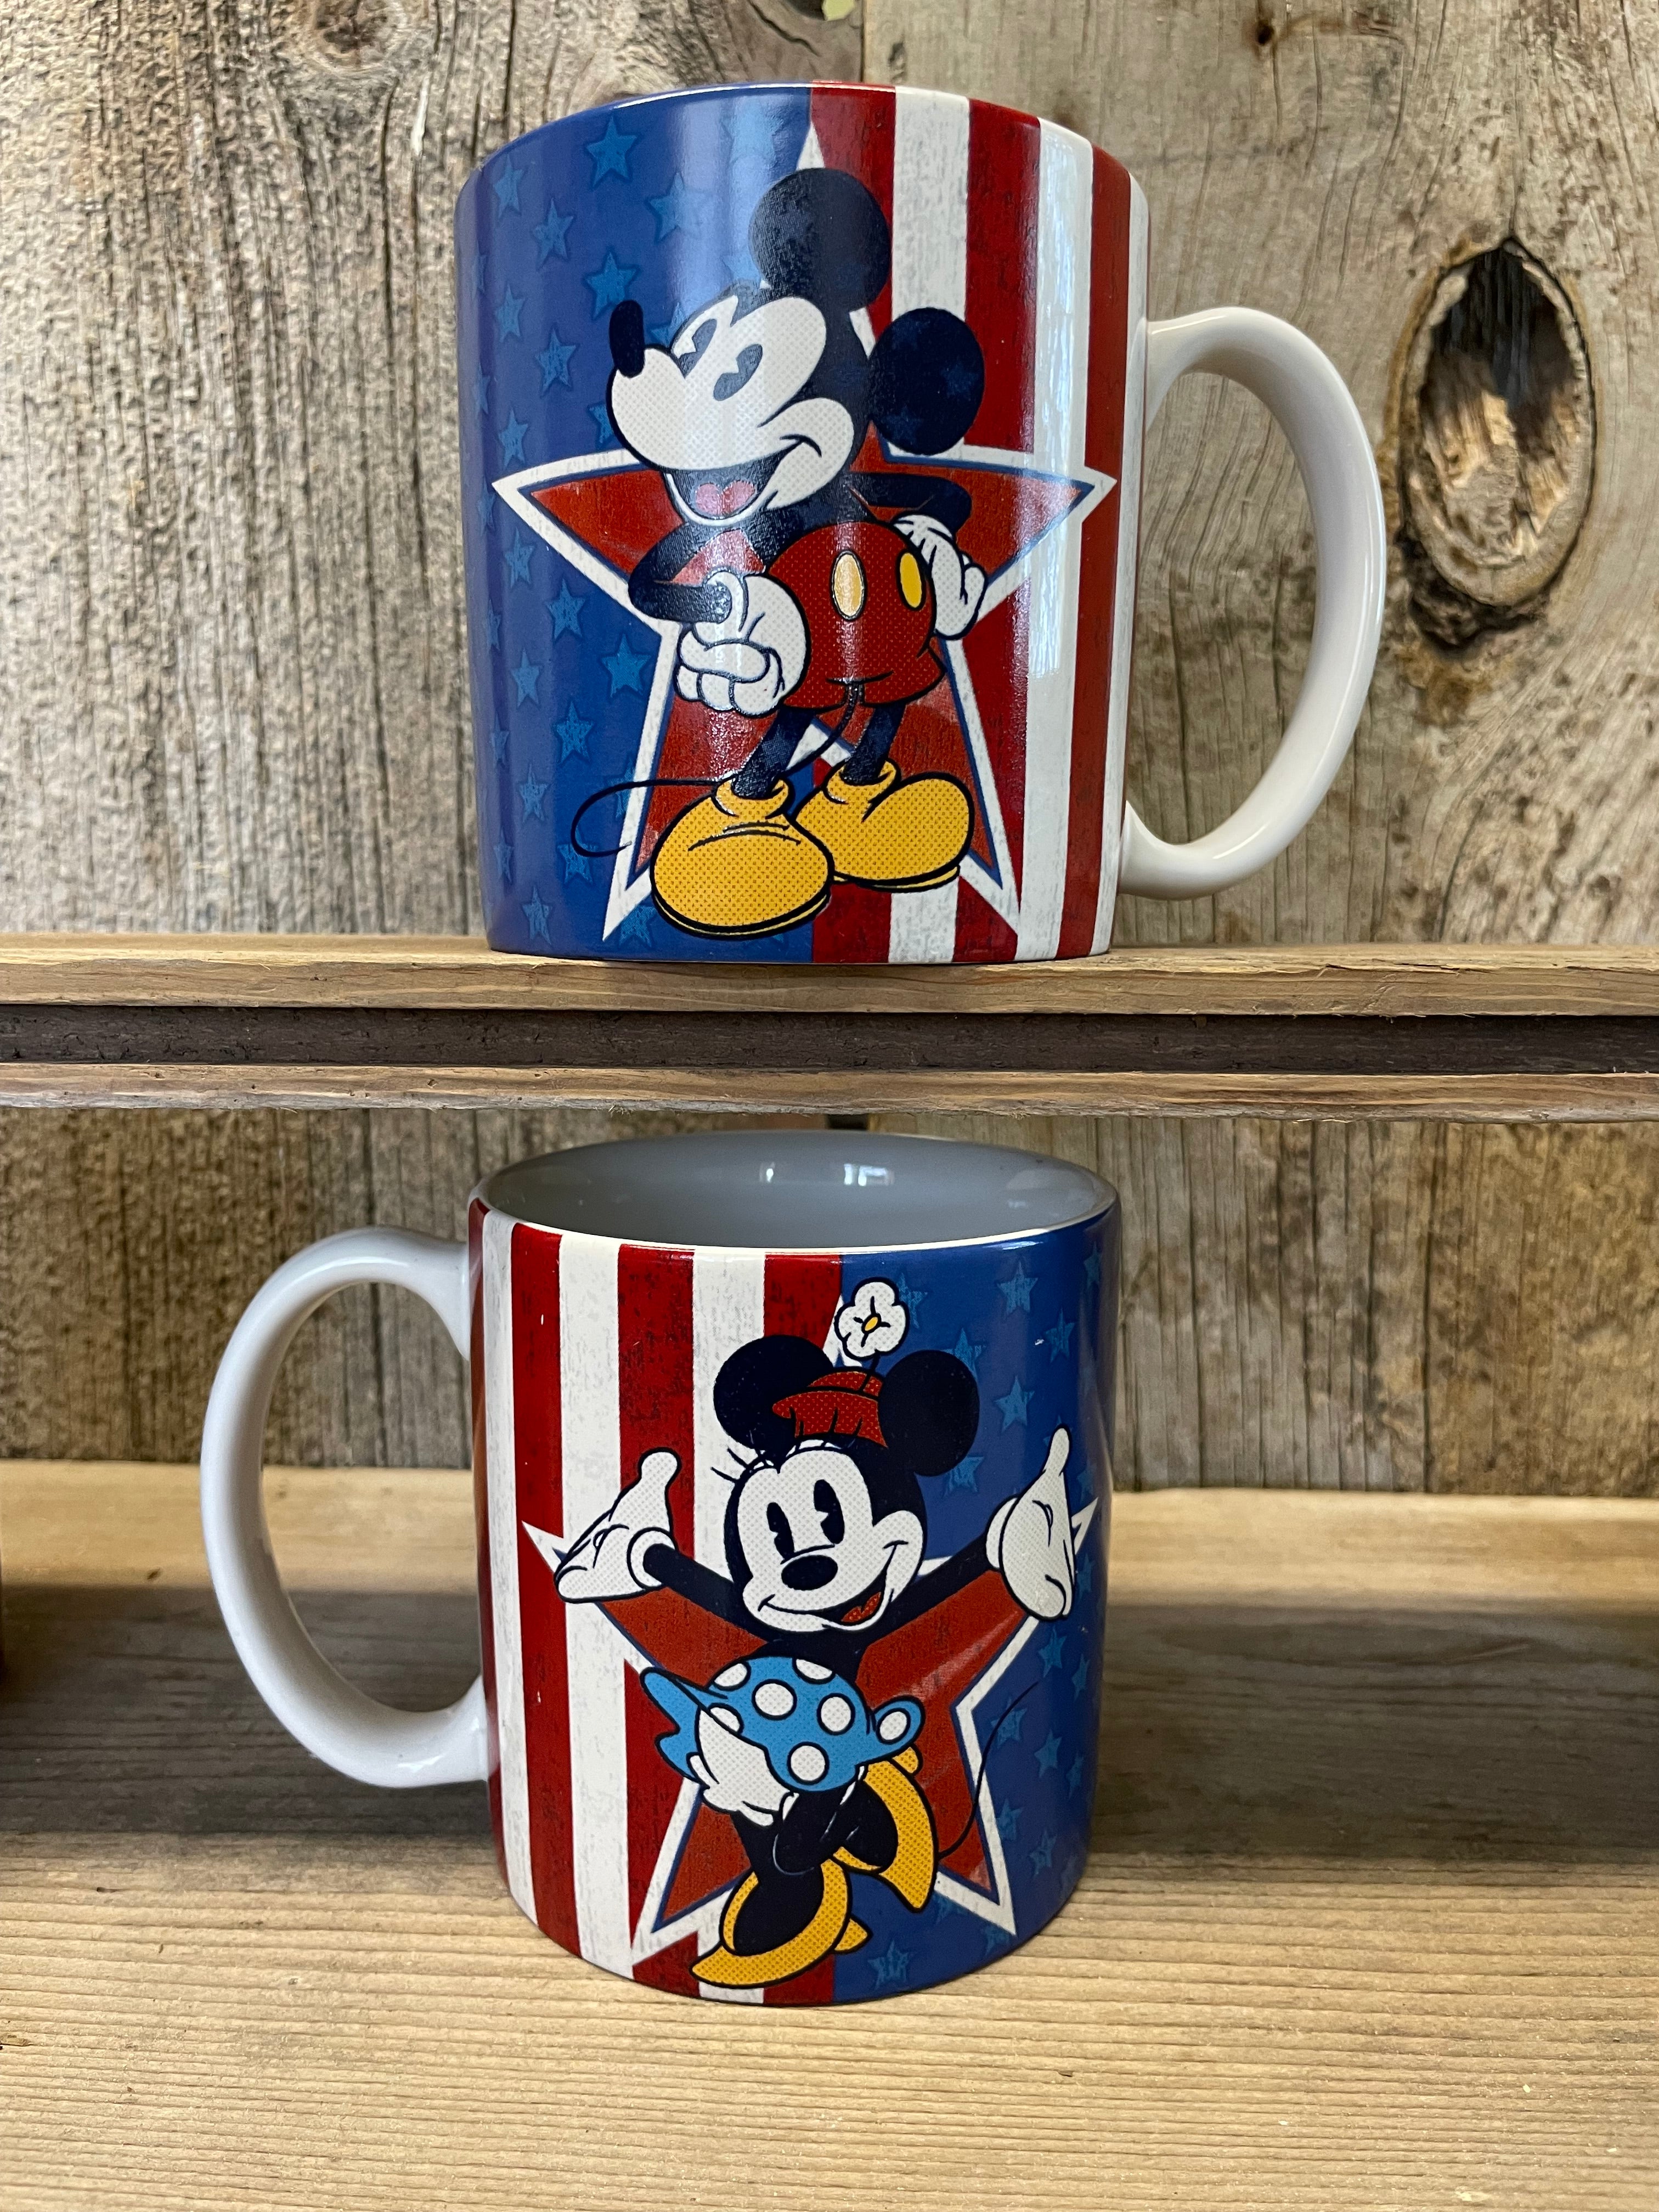 Disney Store Mickey and Minnie Mouse Stars and Stripes Mugs-Pair